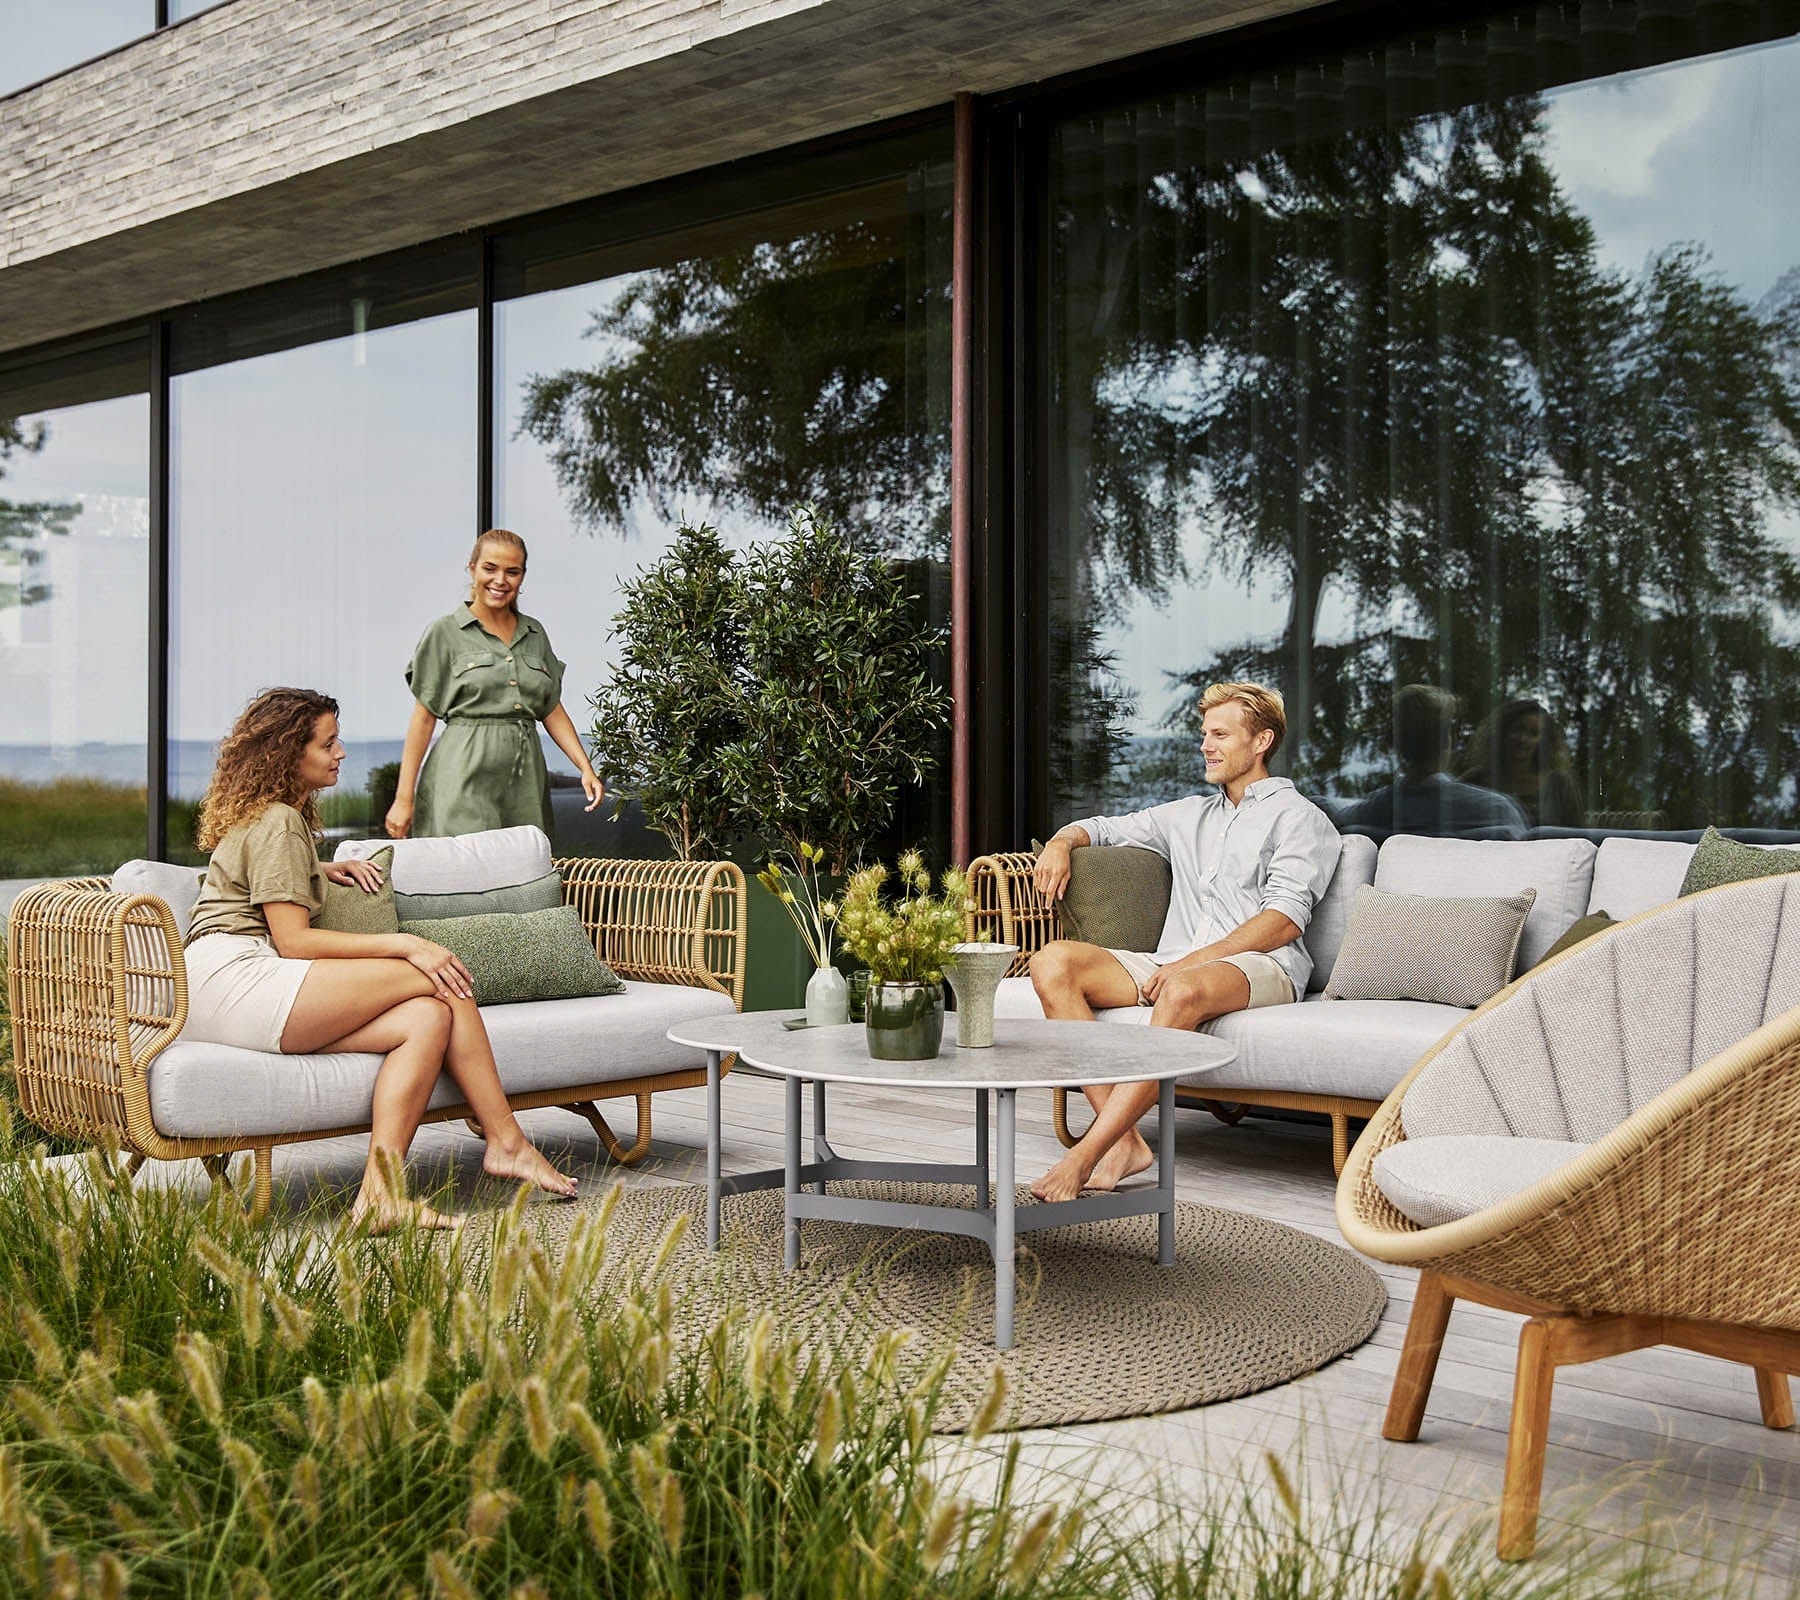 Boxhill's Nest Sofa Outdoor 3 Seater lifestyle image at patio with man and a woman sitting down having a chat, and another woman walking at the side